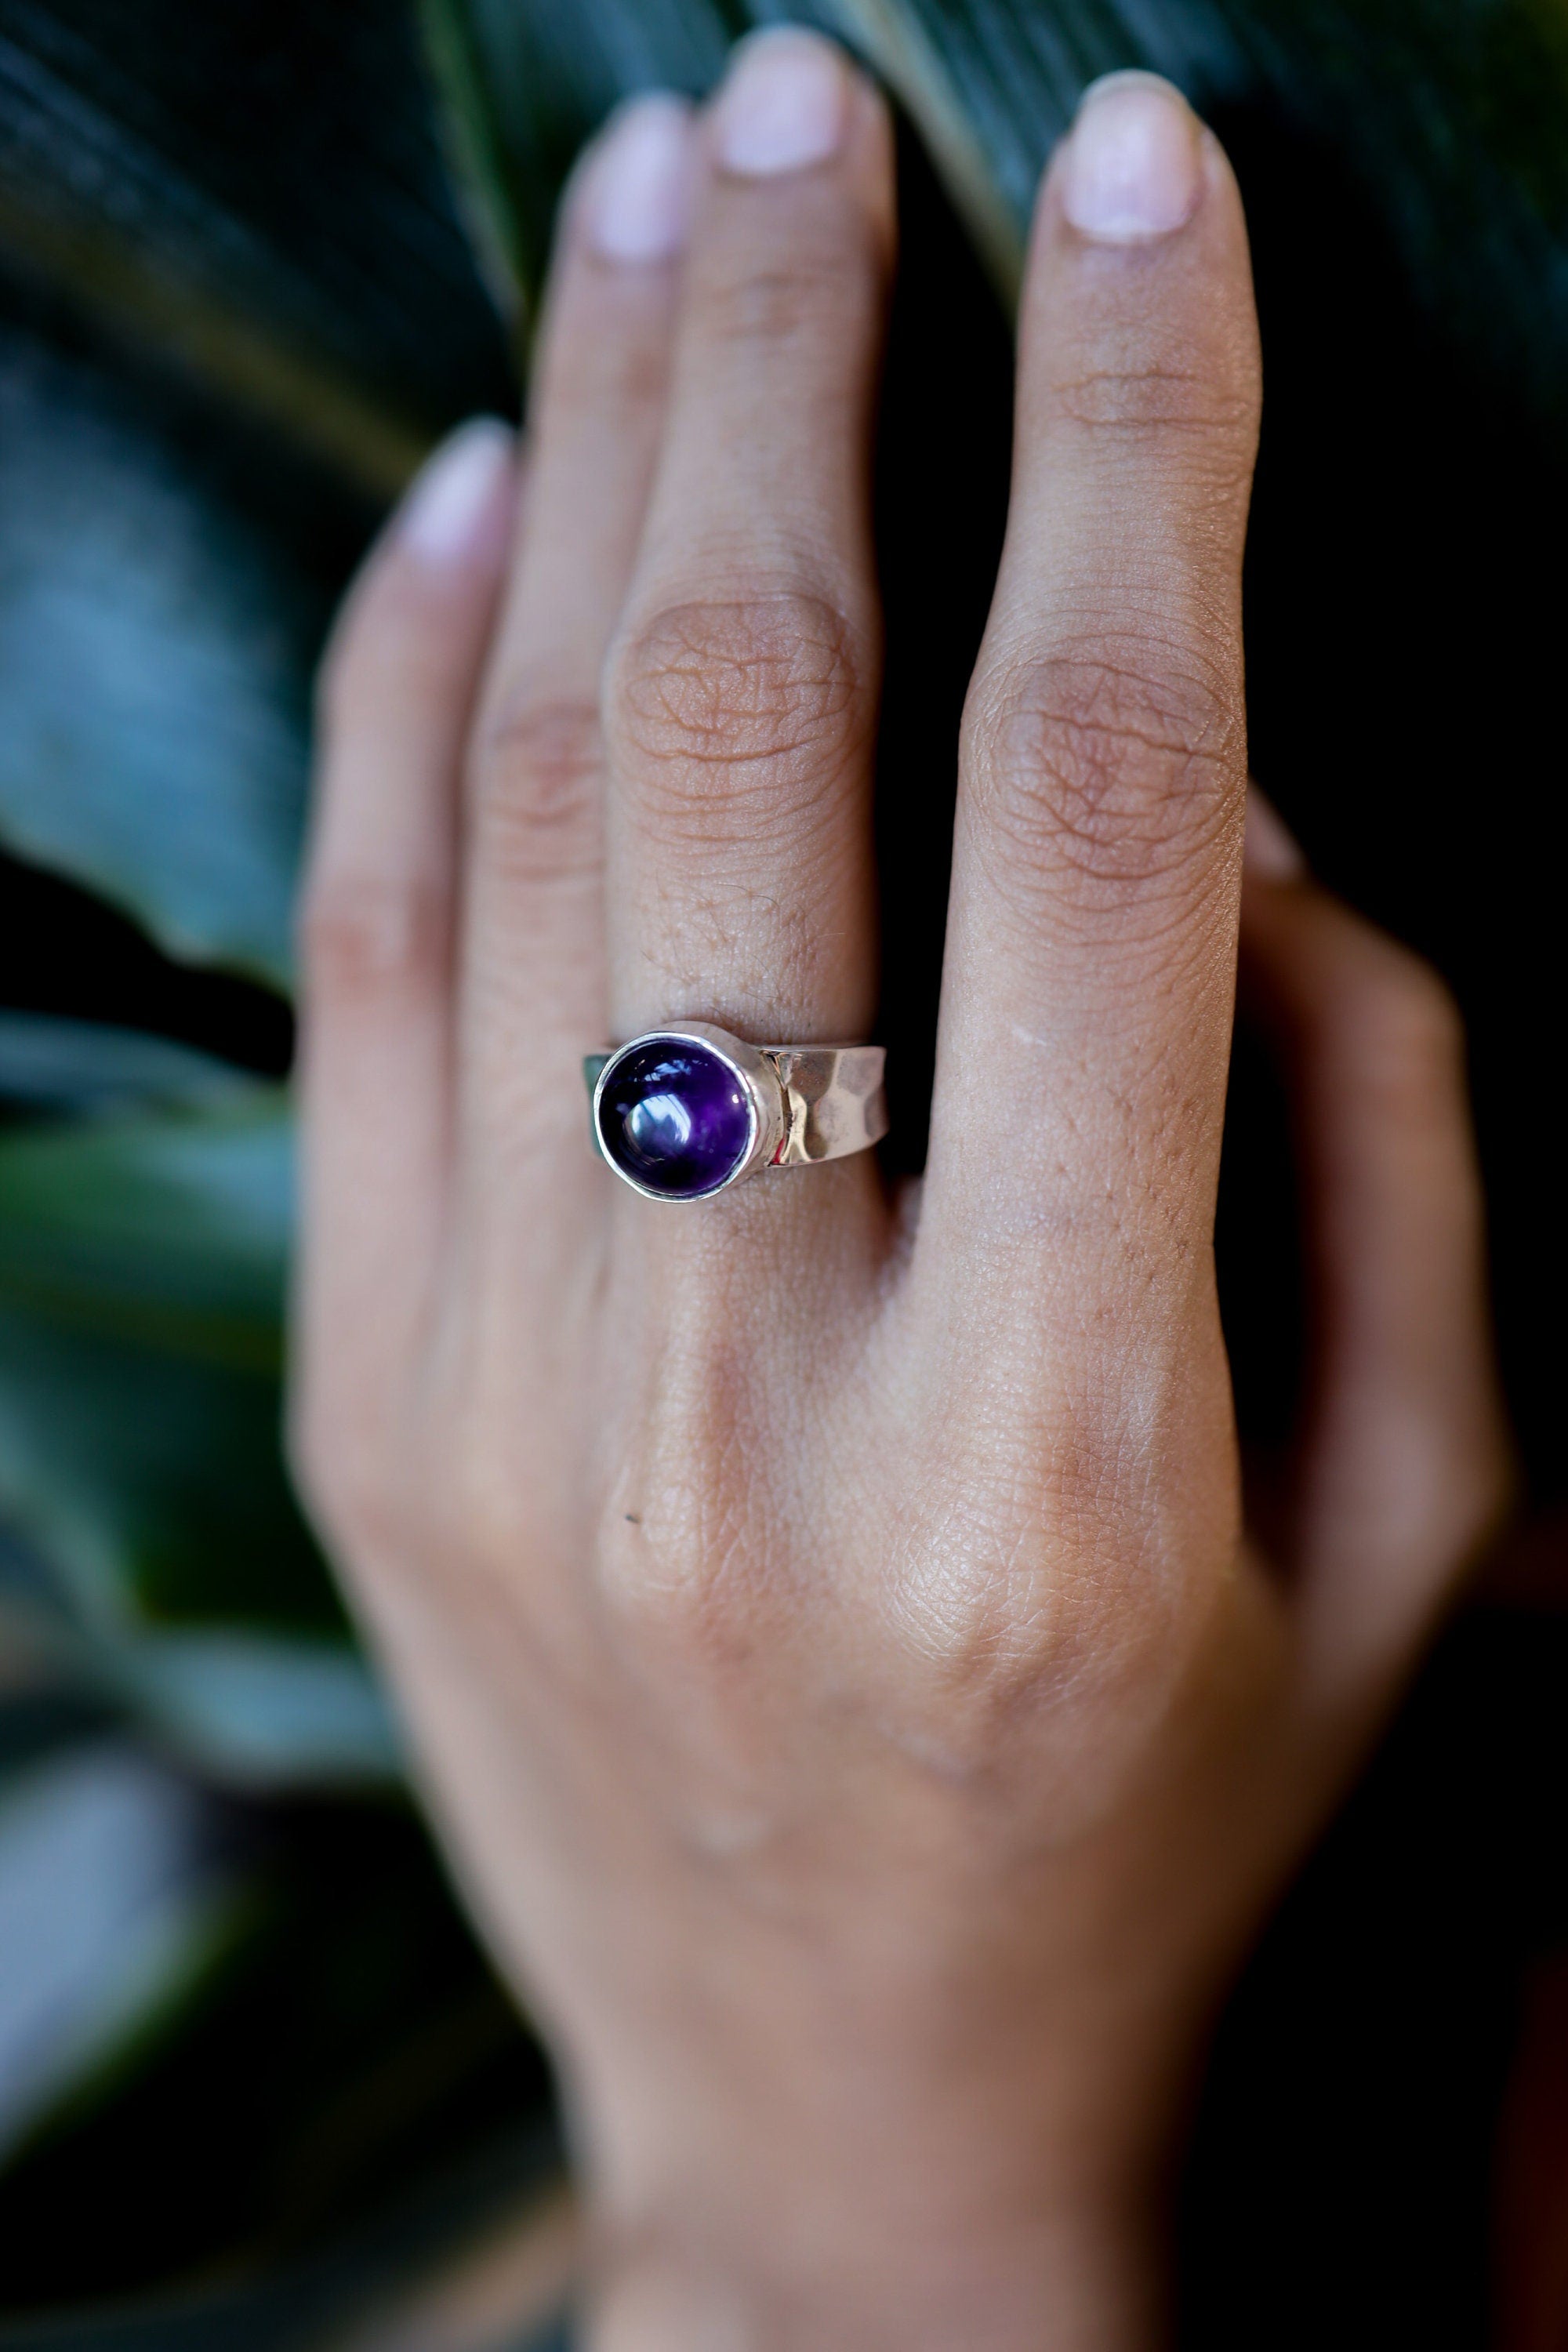 Deep Purple Round Amethyst Quartz Cabochon Ring - Hammered - 925 Sterling Silver - Unisex - High Shine Polish - Promotes Calm & Intuition